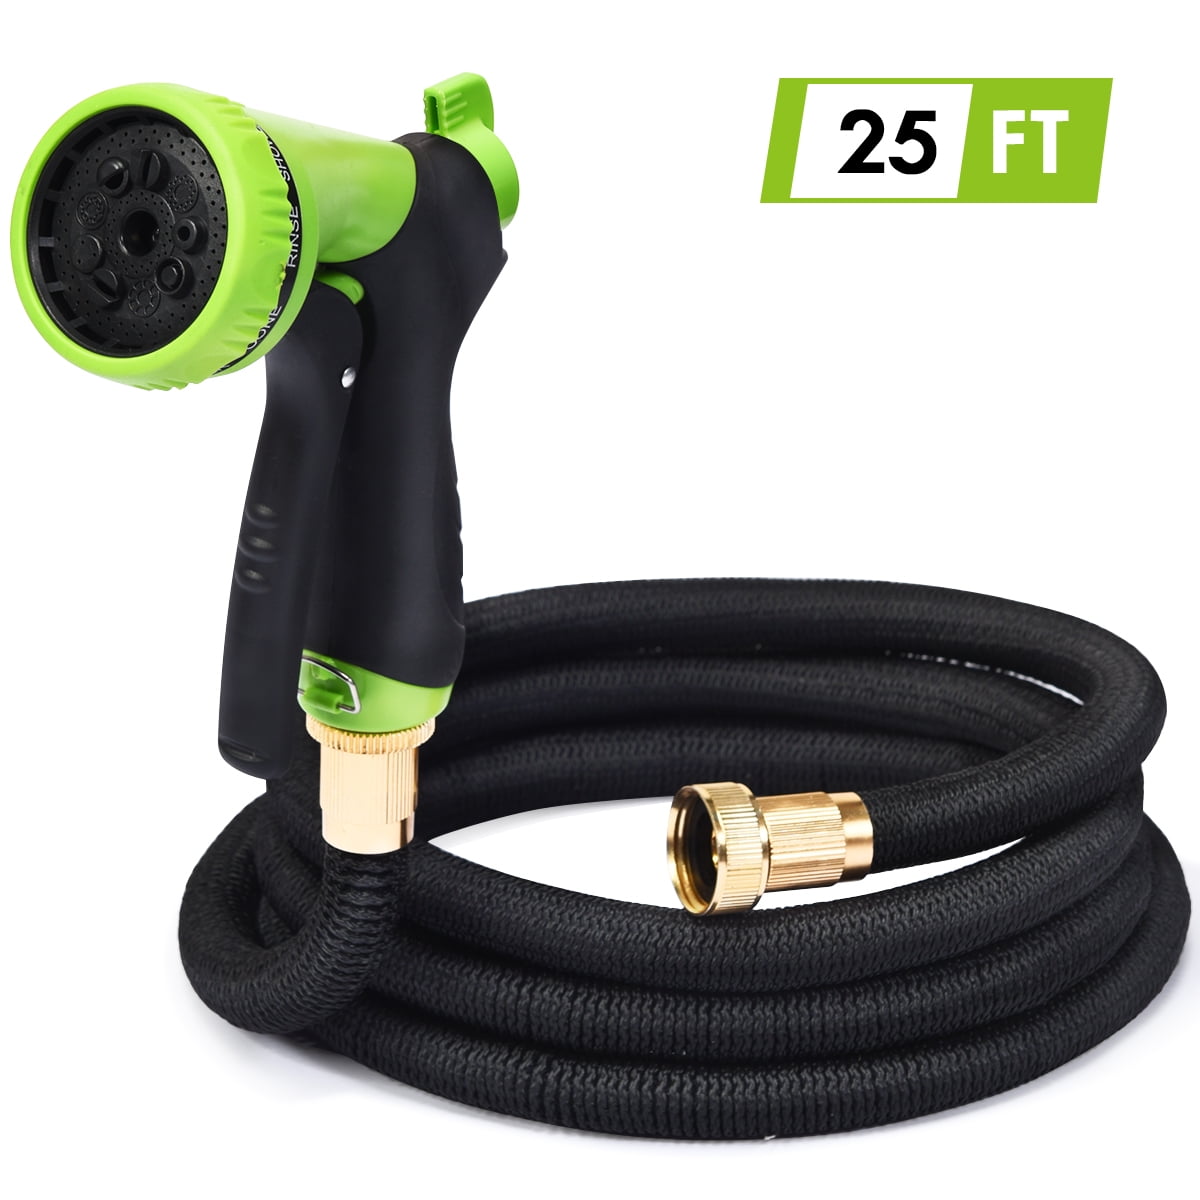 3/4 Solid Brass Connectors 10 Function Spray Hose Nozzle 10FT 10FT/25/50/75/100 FT/150FT Upgraded Expandable Garden Hose Leak Proof and Lightweight Retractable Water Hose 